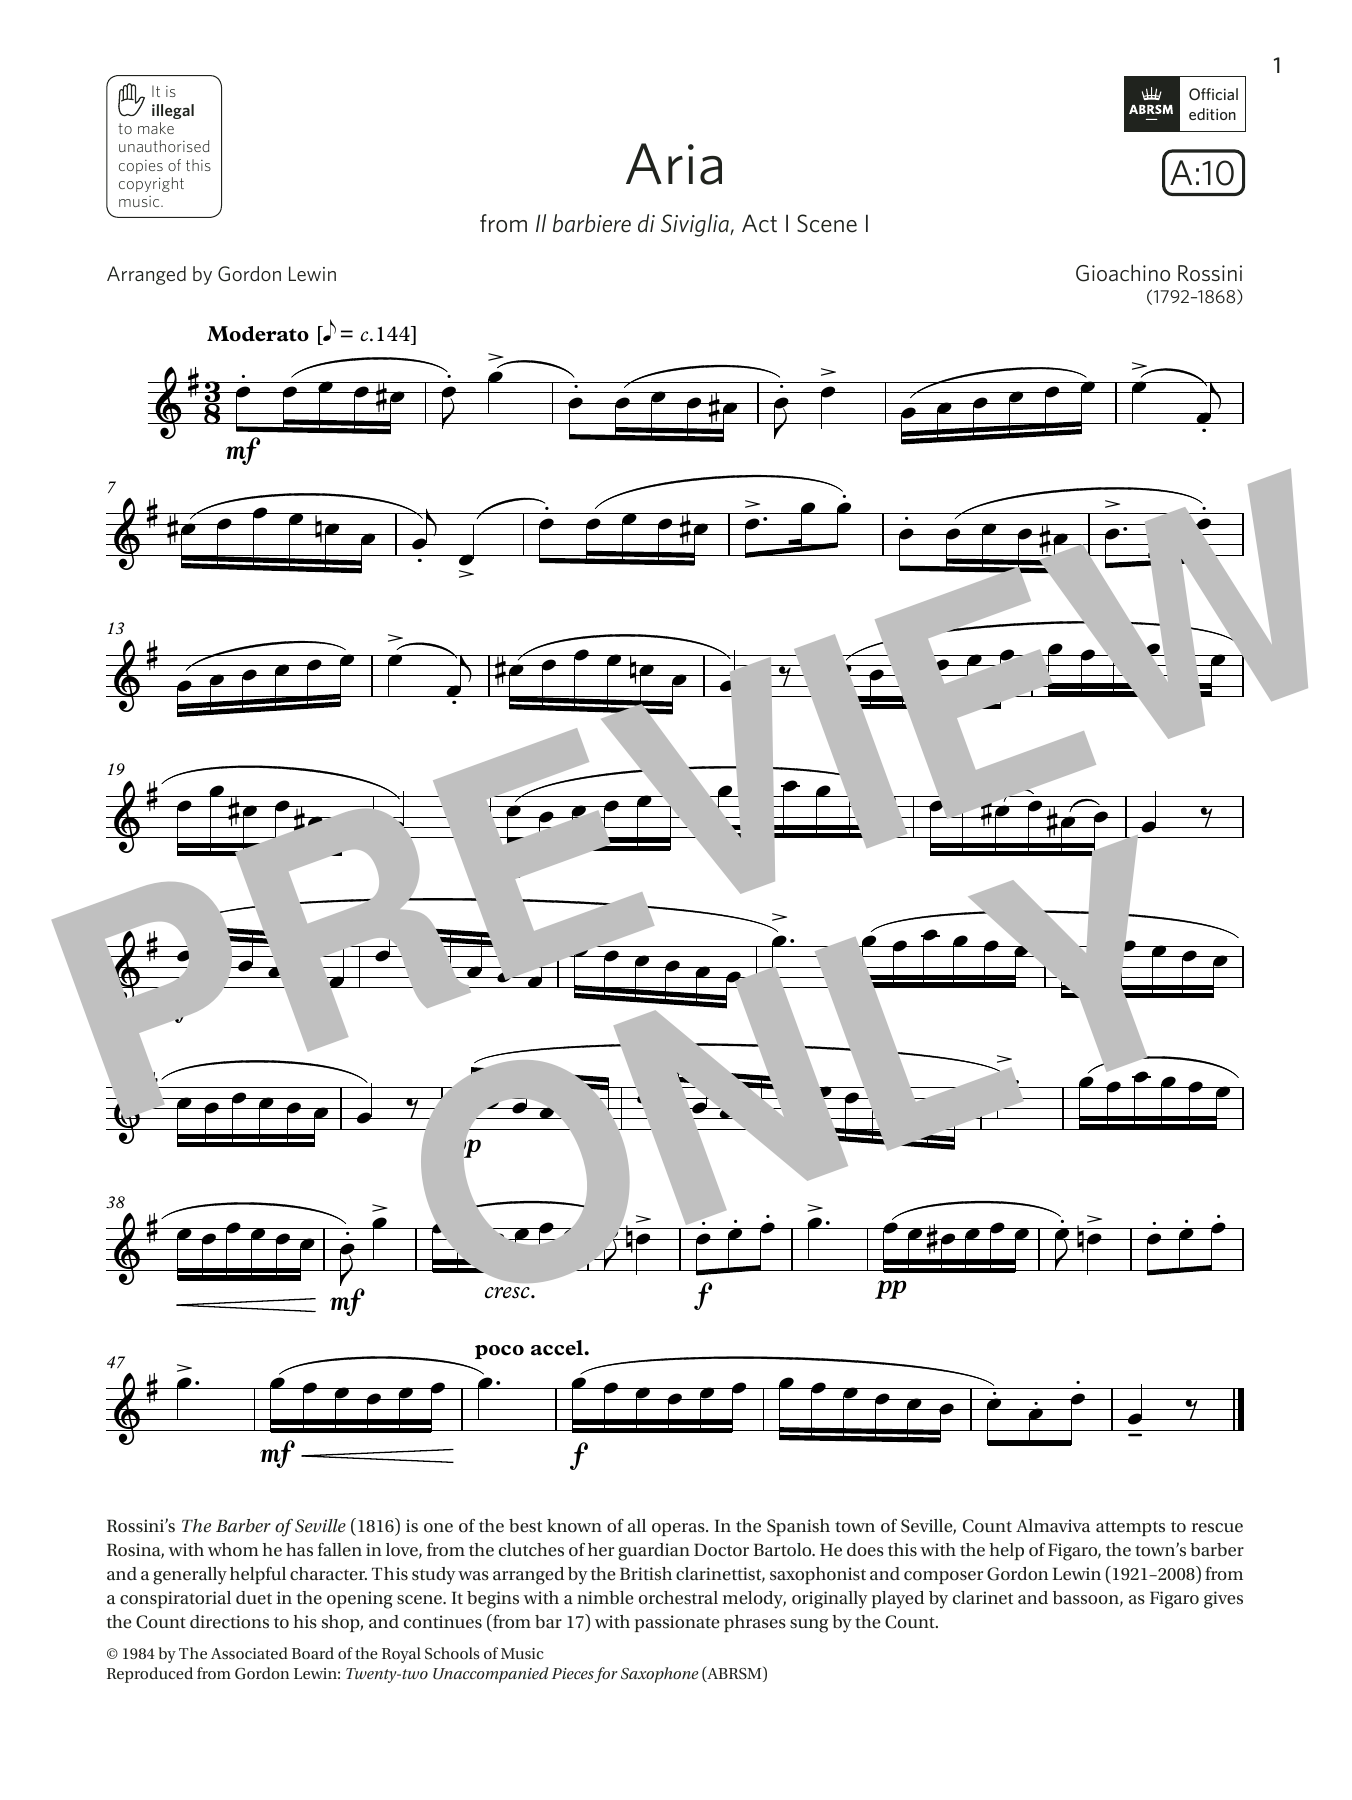 Rossini Aria (from Il barbiere di Siviglia)  (Grade 5 List A10 from the ABRSM Saxophone syllabus from 2022) sheet music notes and chords arranged for Alto Sax Solo